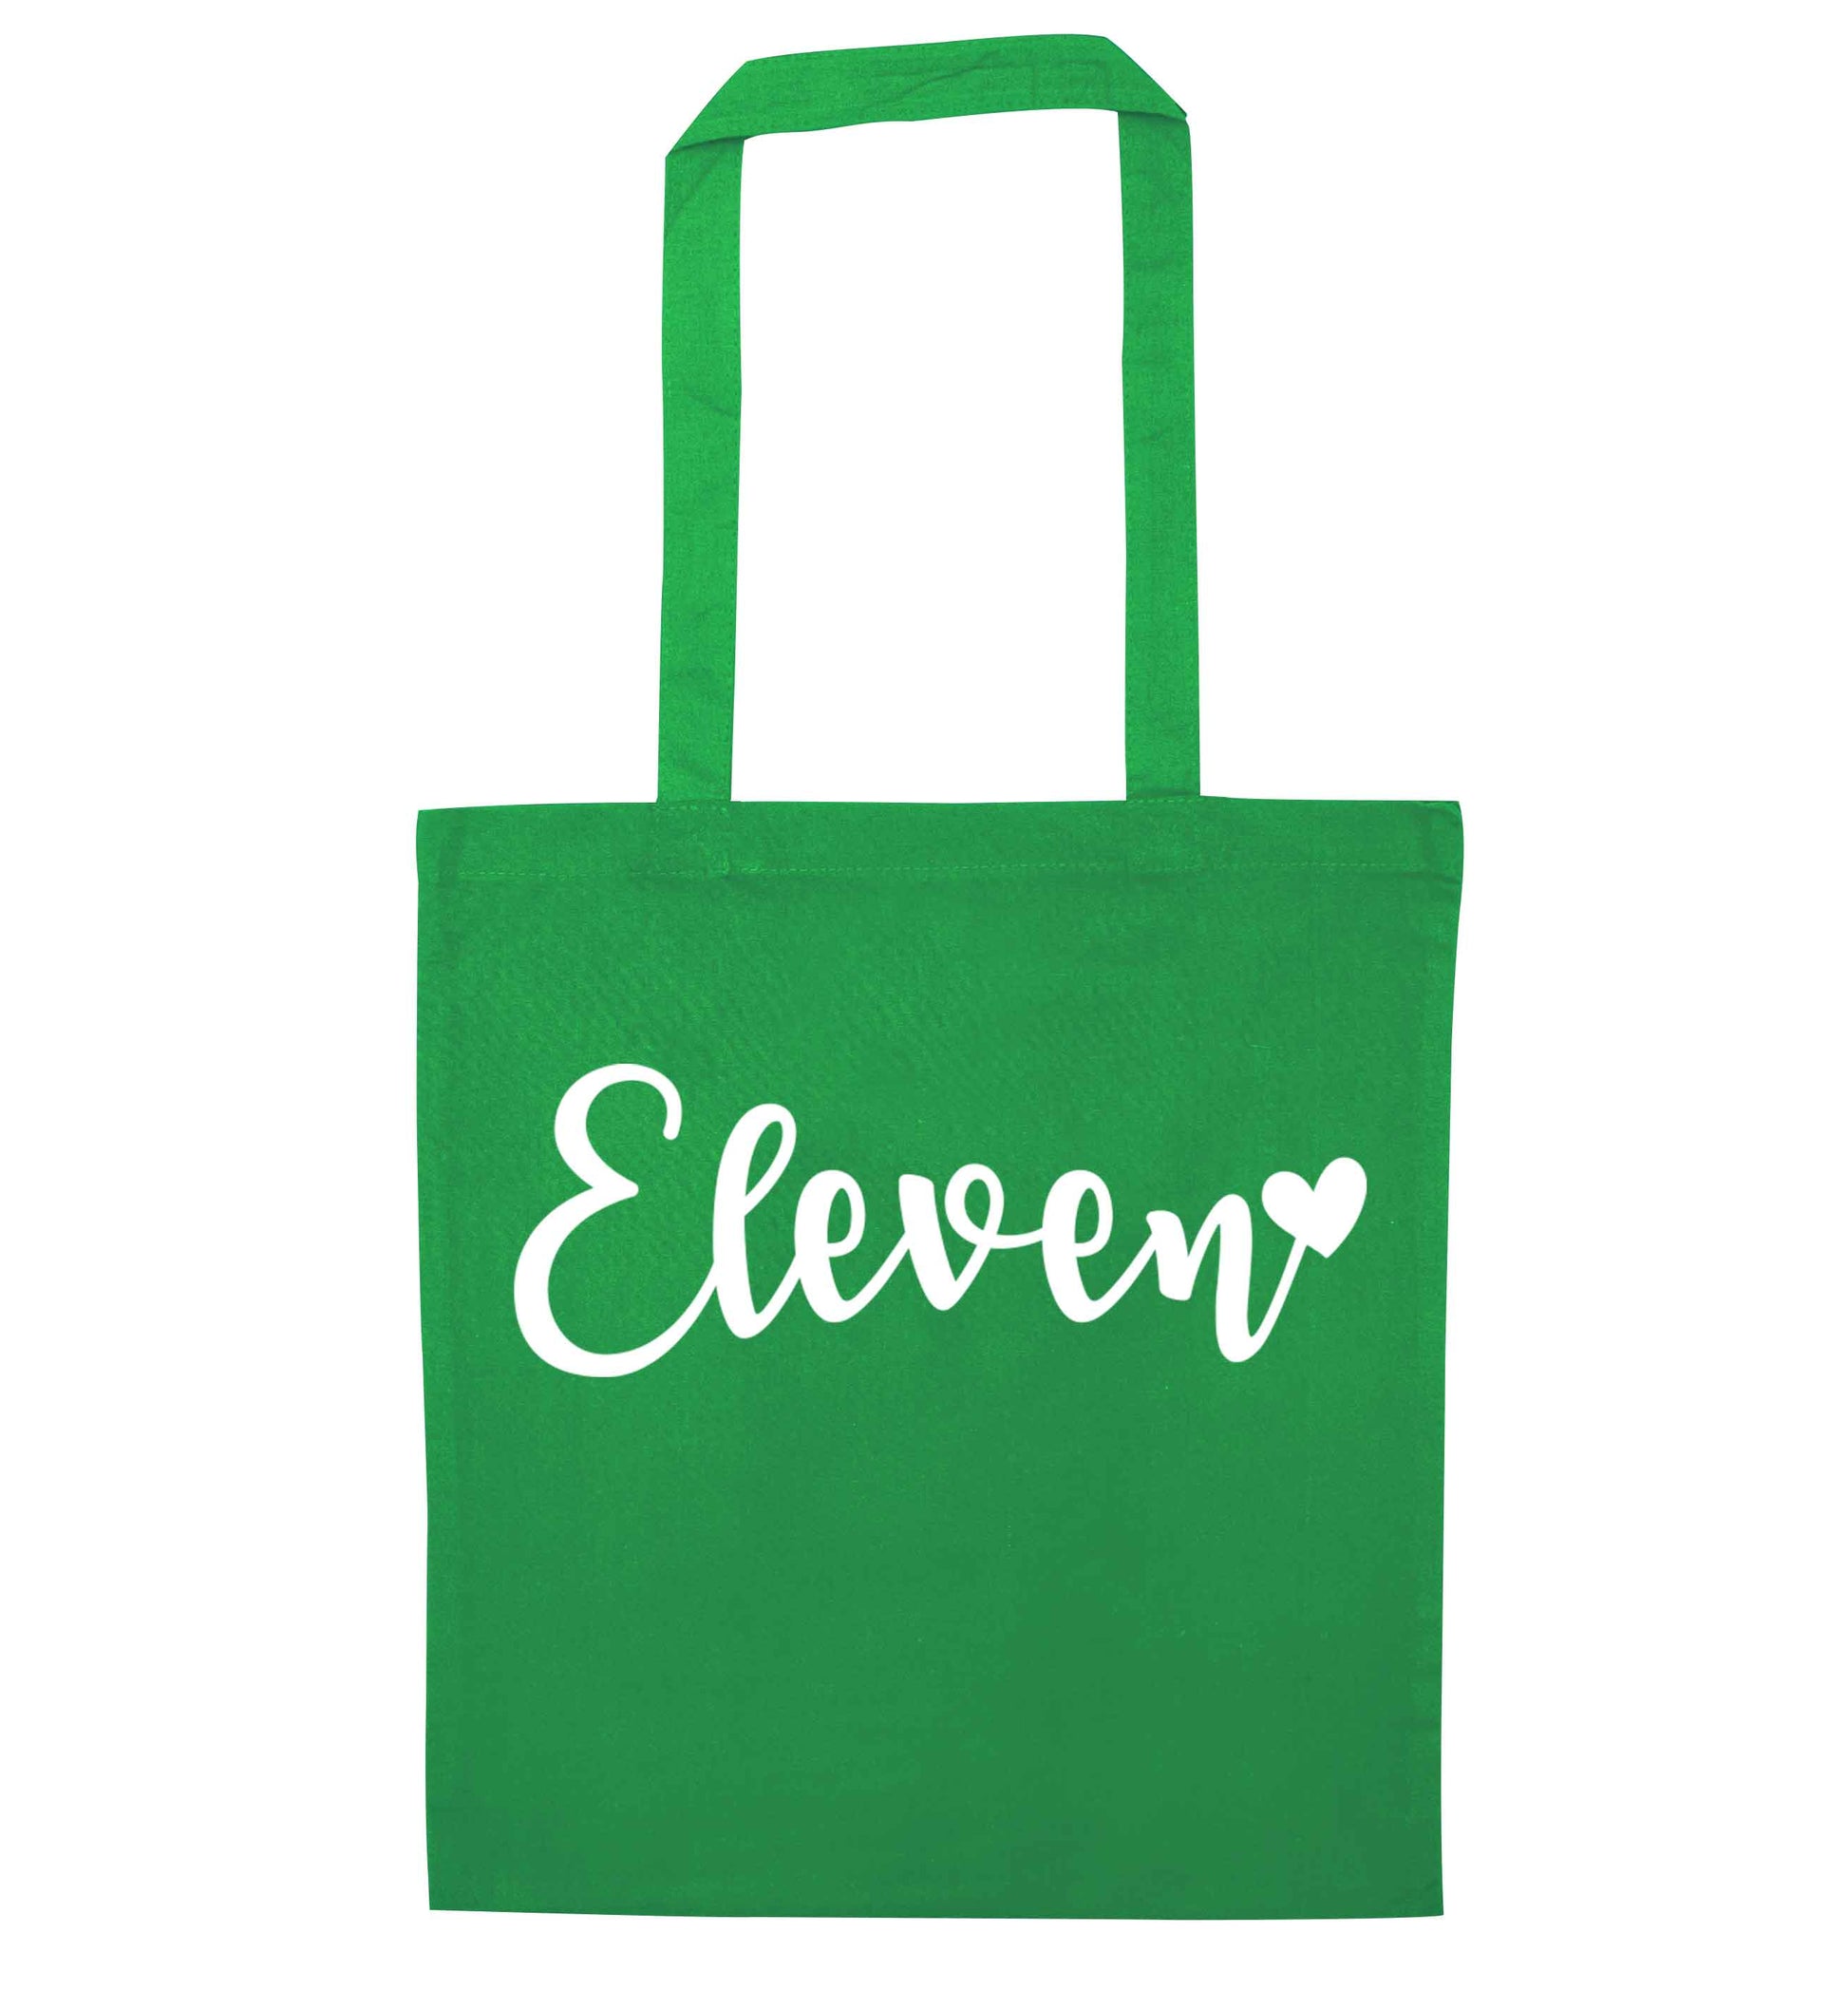 Eleven and heart! green tote bag